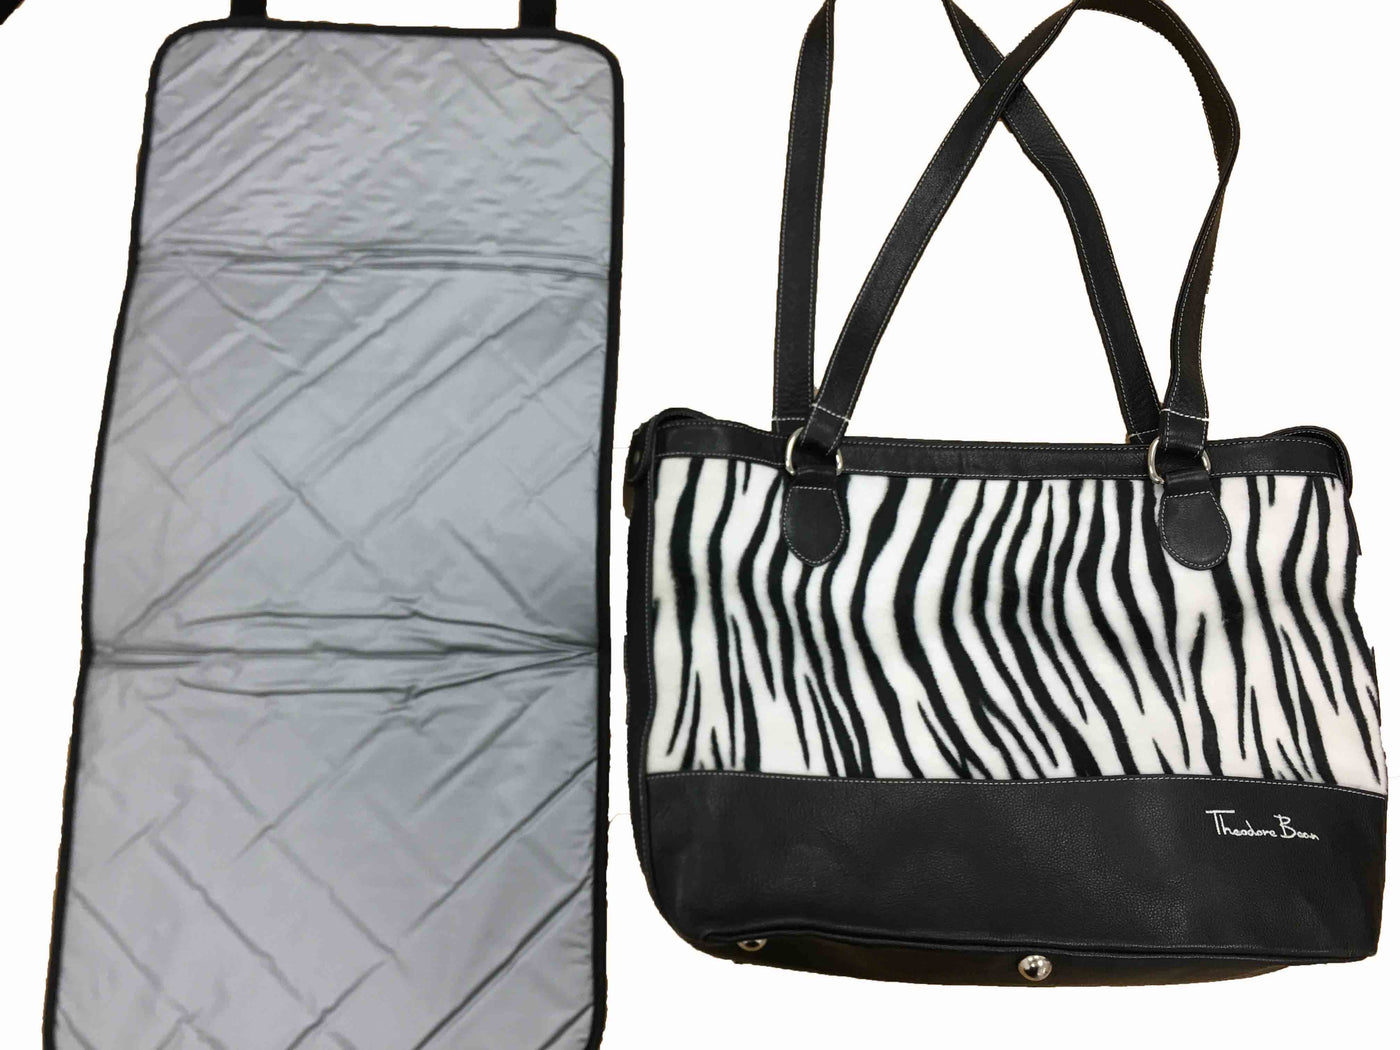 Theodore Bean Baby Changing Bag - Zebra changing change bags Earthlets